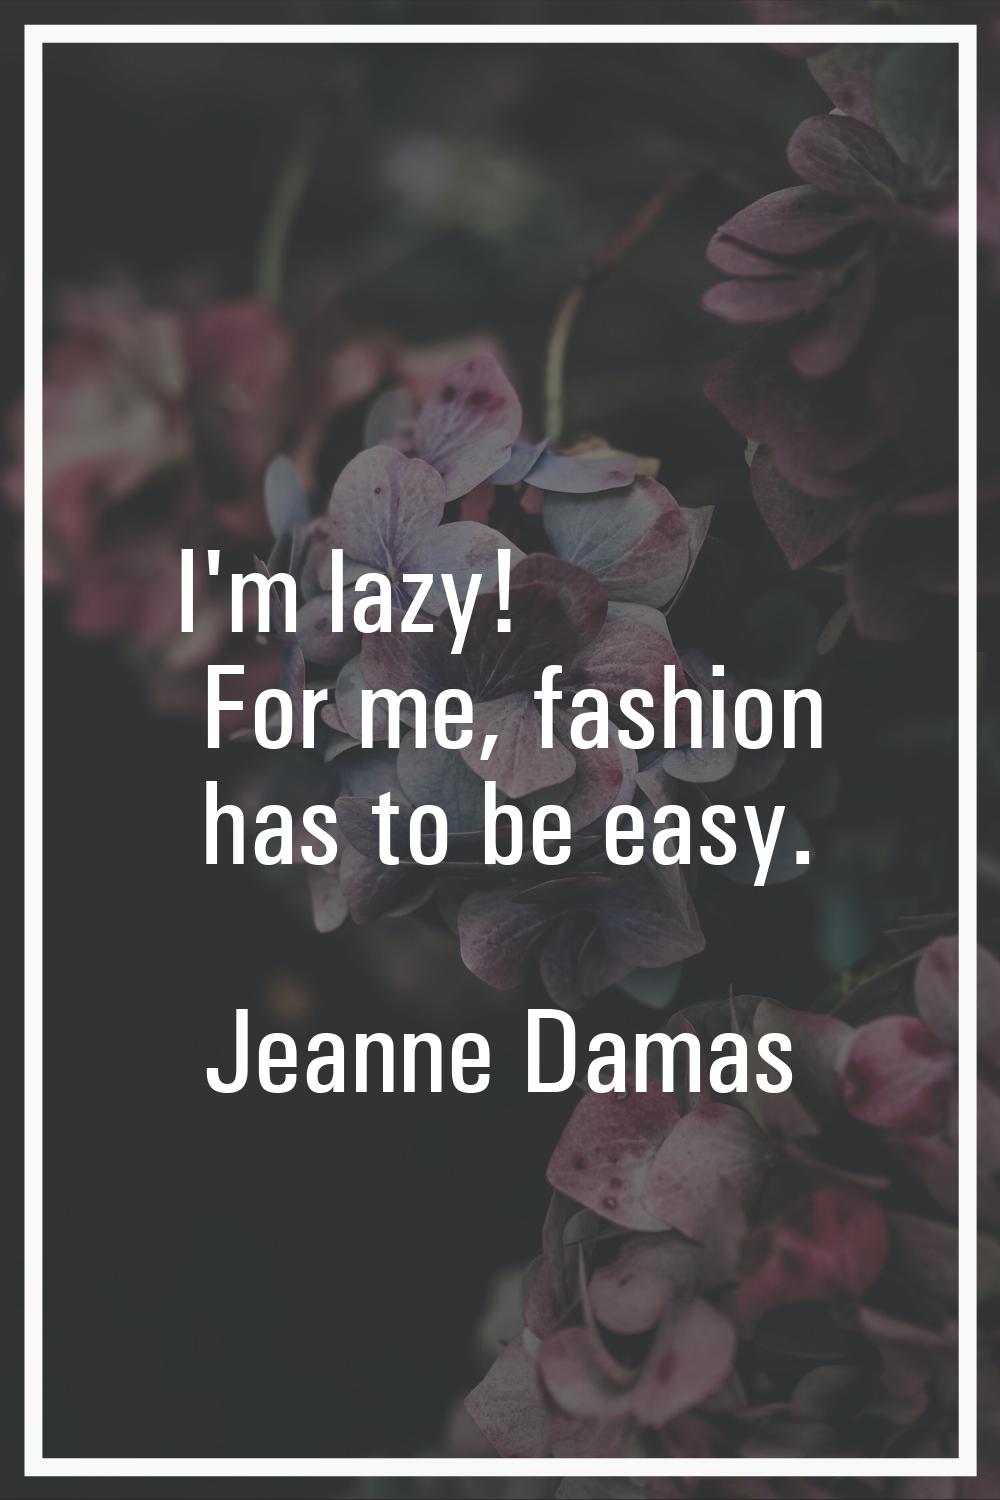 I'm lazy! For me, fashion has to be easy.